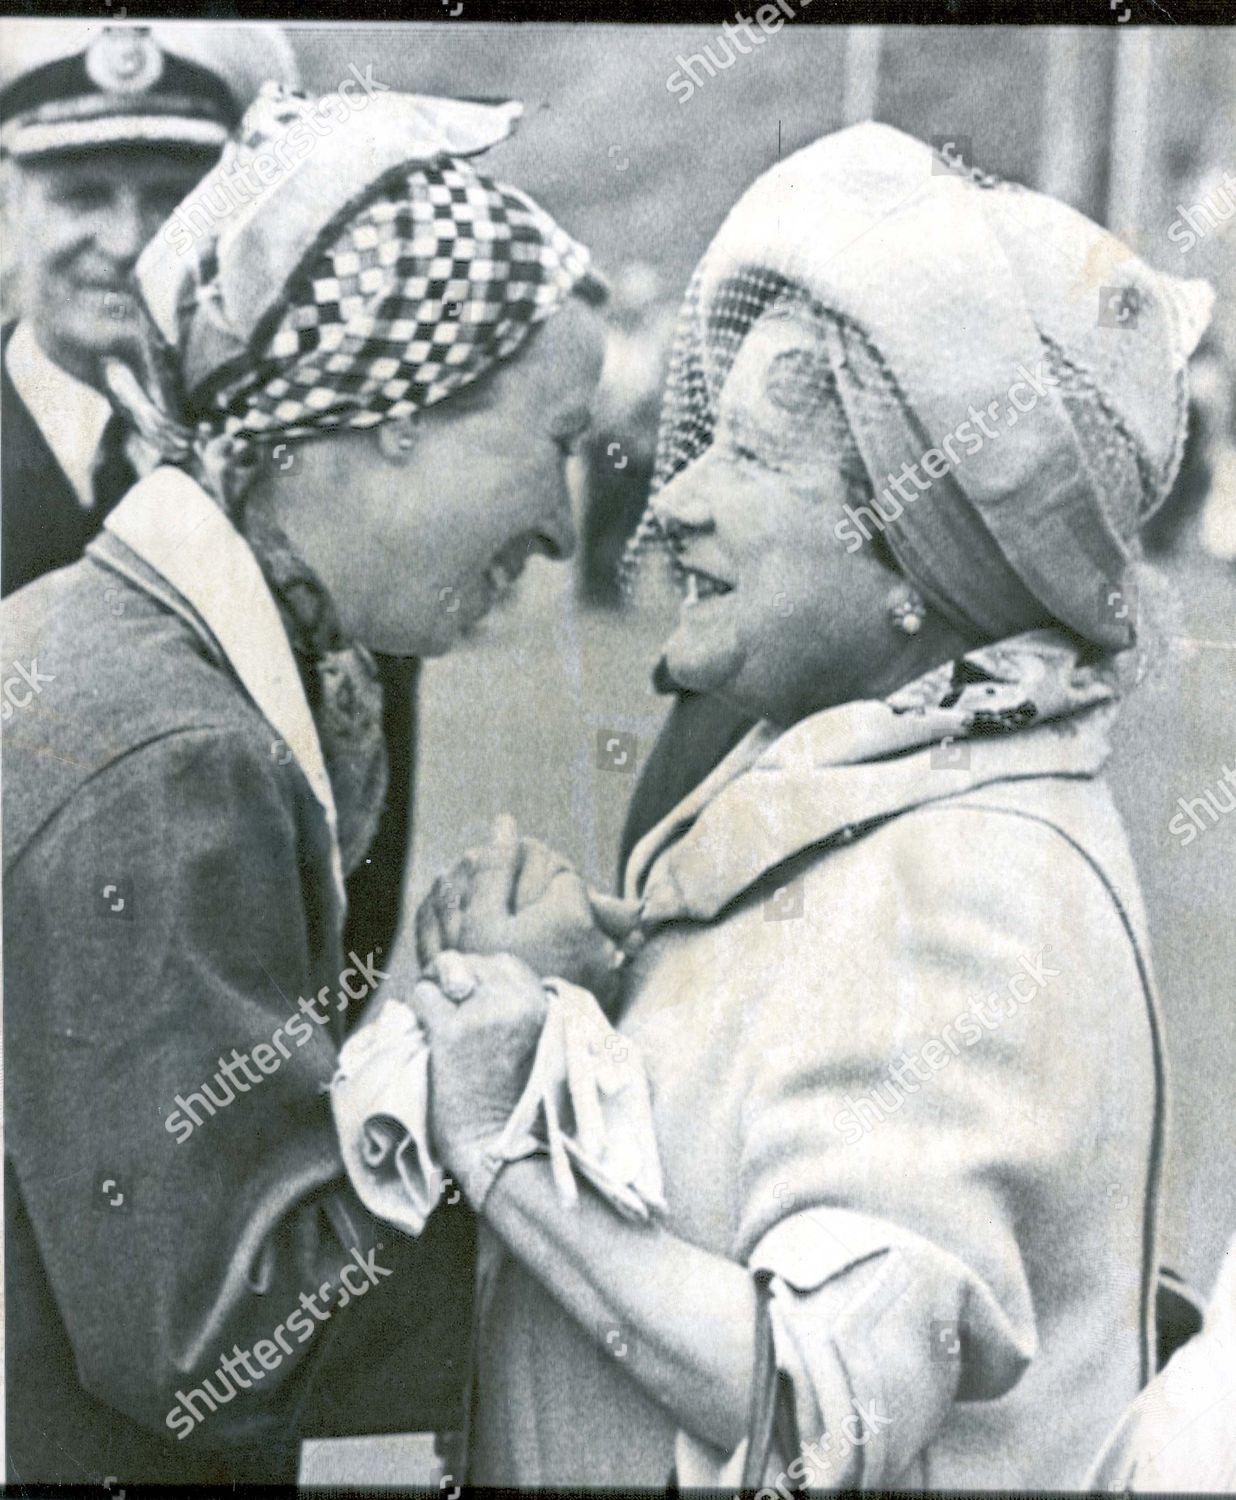 princess-anne-now-princess-royal-riding-1977-birthday-hugs-and-kisses-from-grannie-as-she-arrives-at-scrabster-princess-anne-was-all-at-sea-when-she-woke-up-yesterday-her-27th-birthday-but-she-was-left-in-no-doubt-about-the-date-when-she-st-shutterstock-editorial-891113a.jpg